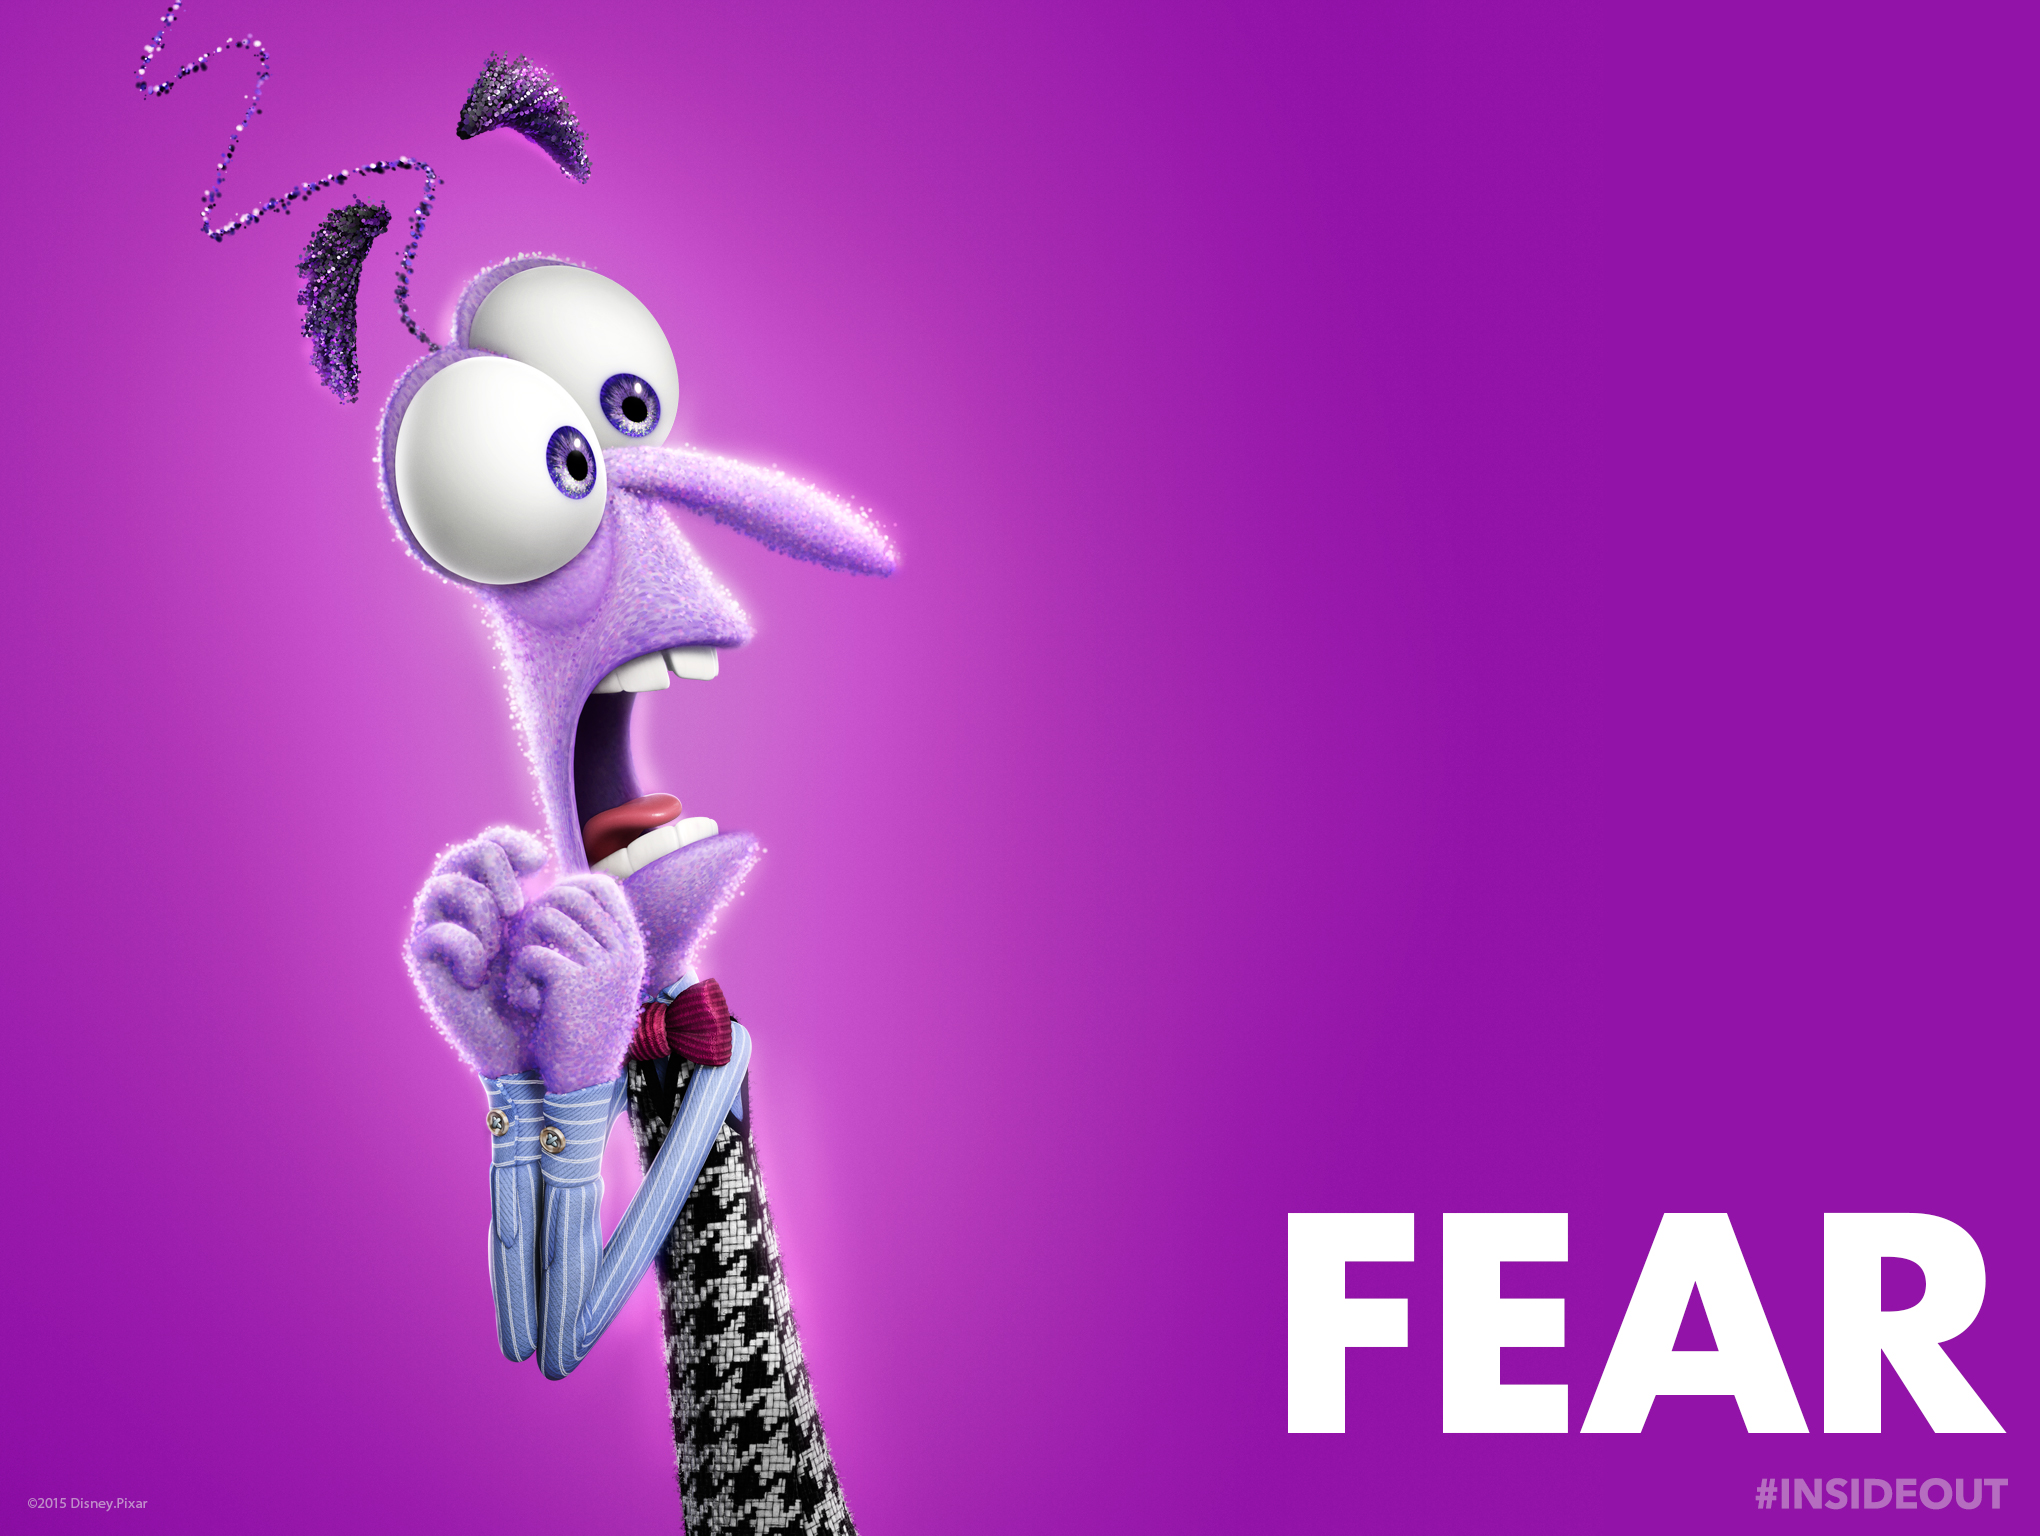 https://static.wikia.nocookie.net/pixar/images/7/79/Io_Fear_standard2.jpg/revision/latest?cb=20150425021148